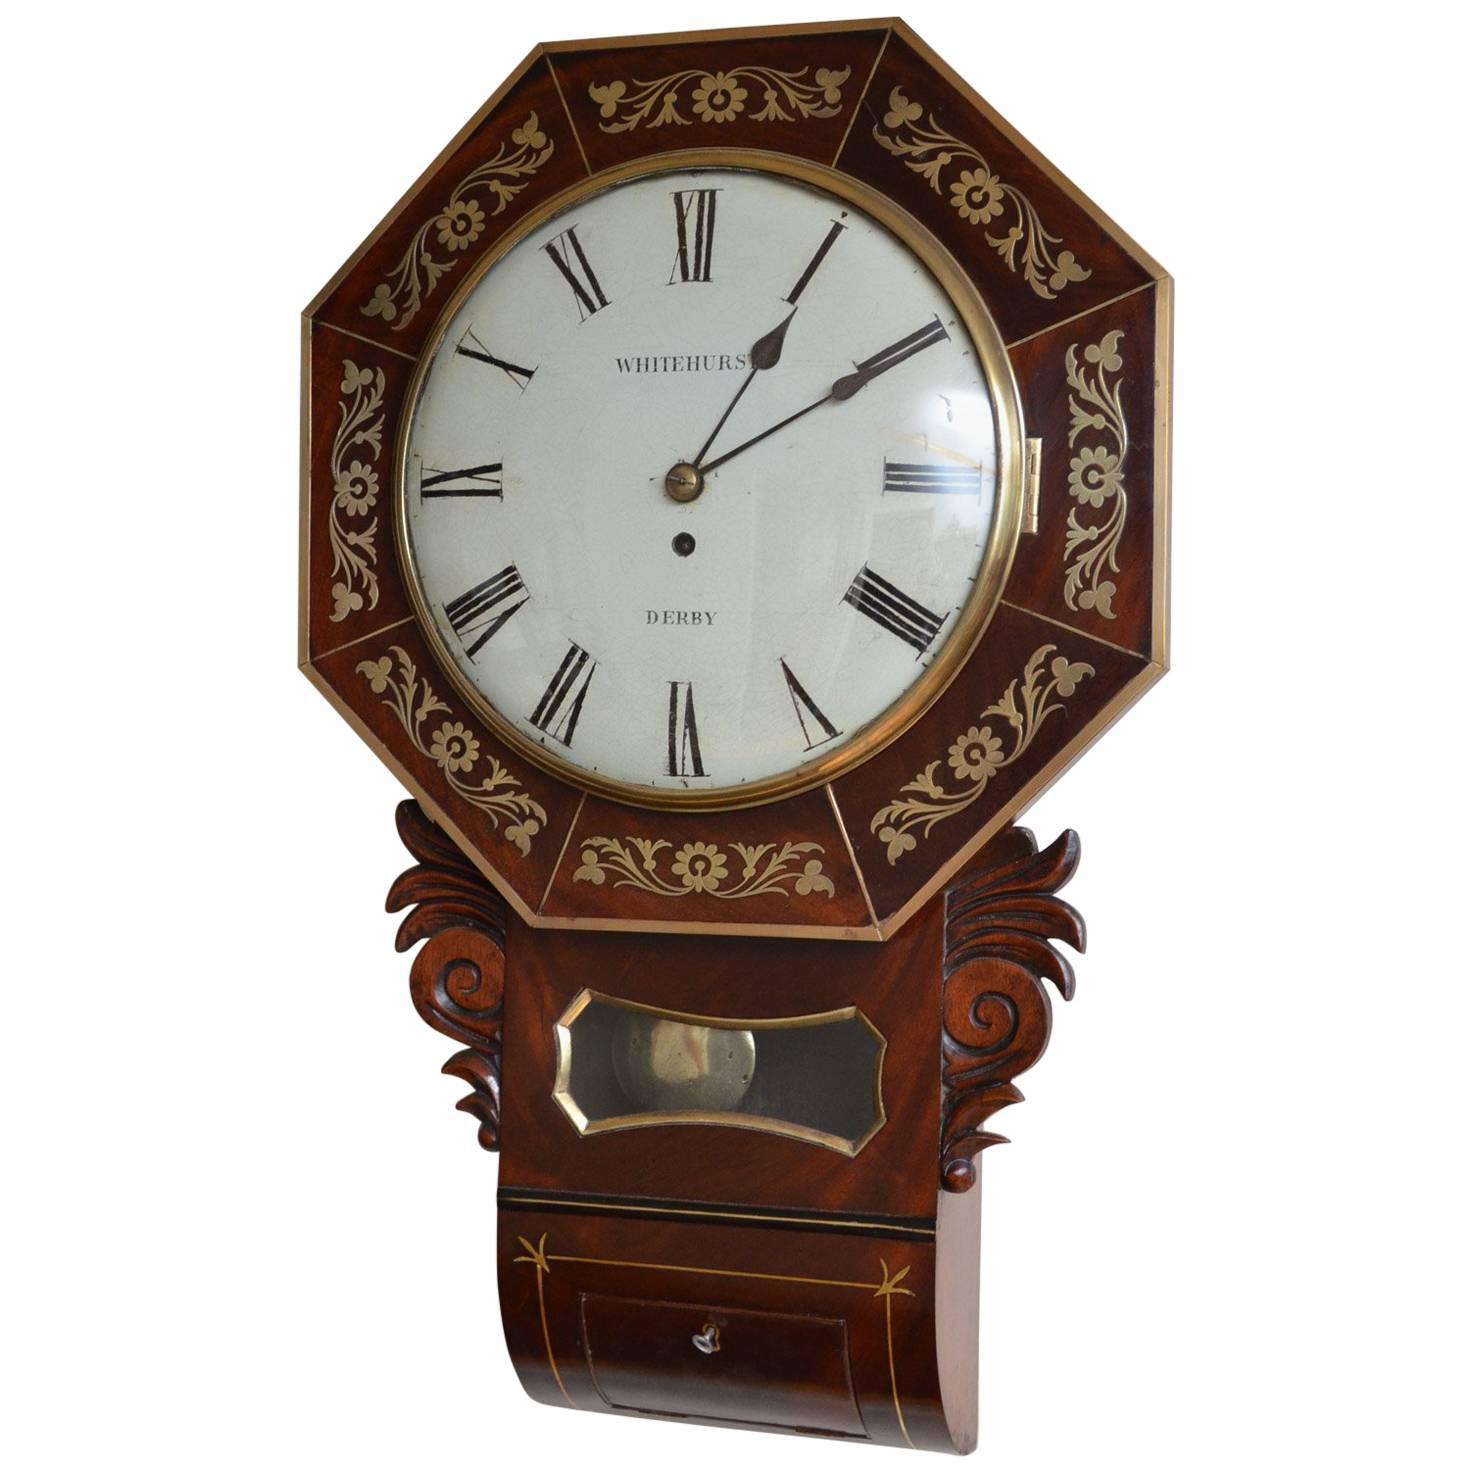 Whitehurst of Derby Wall Clock For Sale